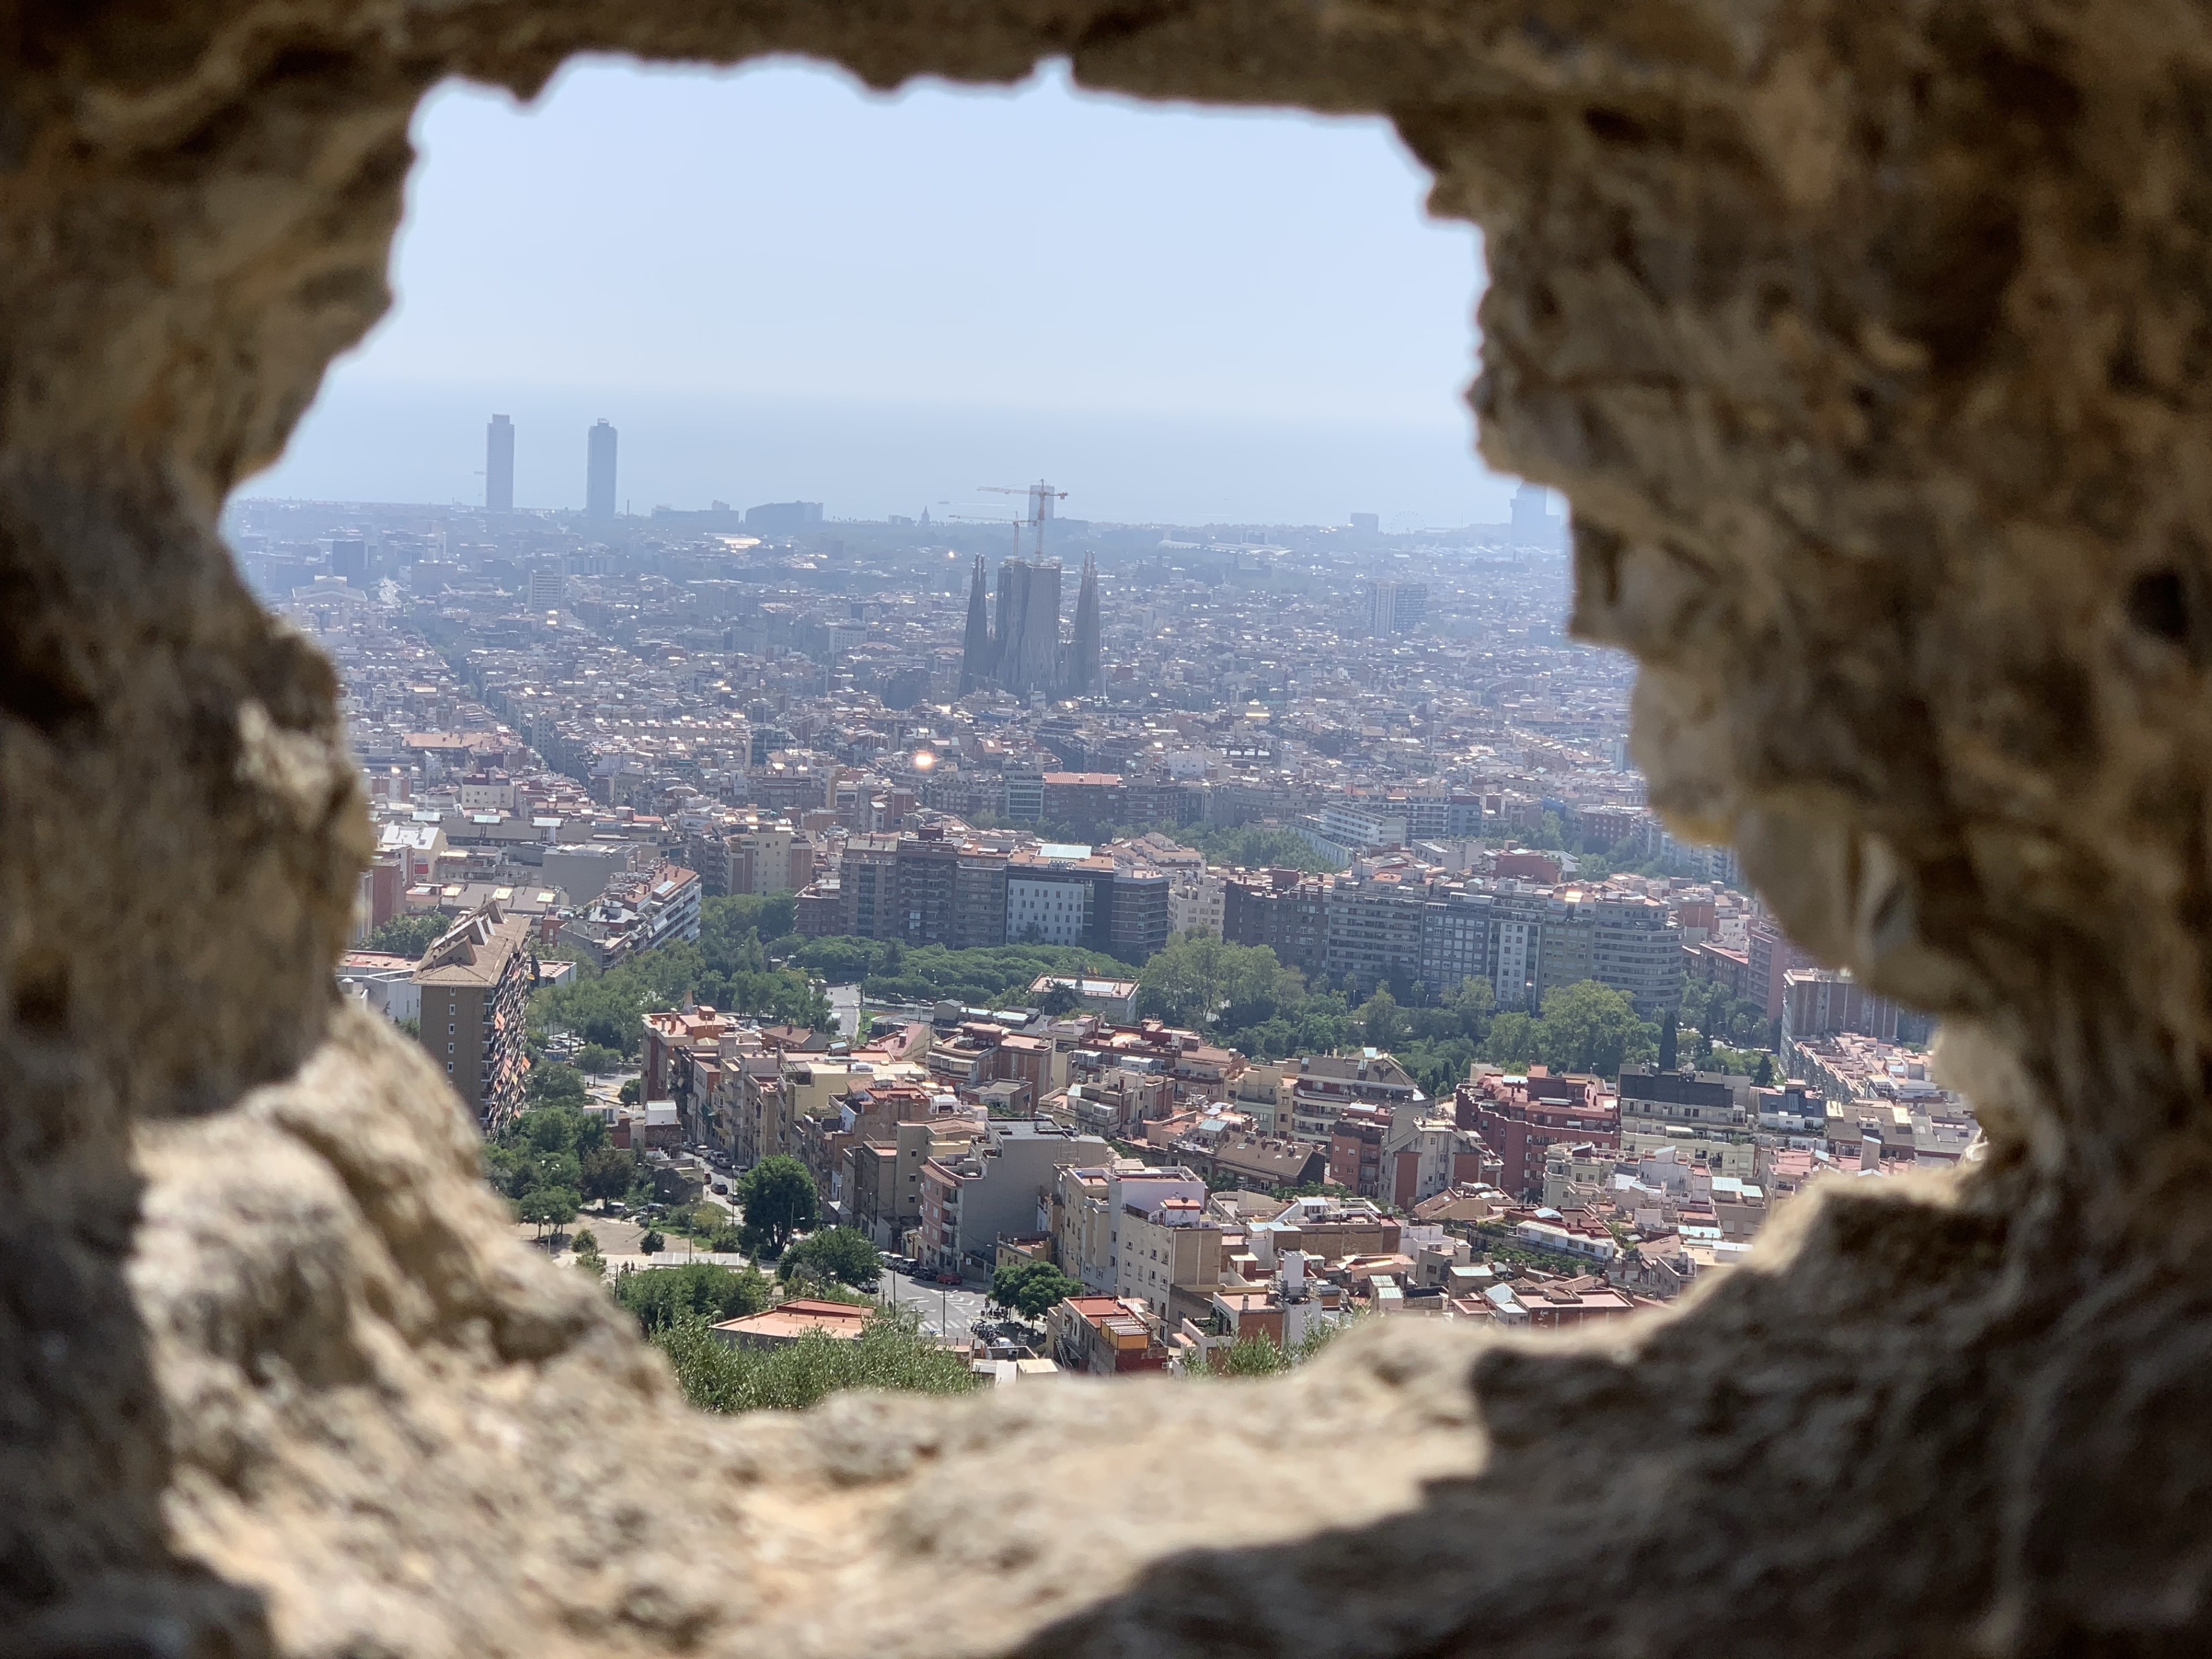 View of Barcelona and The Sagrada Familia from the Bunkers del Carmel in the hills above Barcelona.
A trek to get to the top, but worth it.
#barcelona